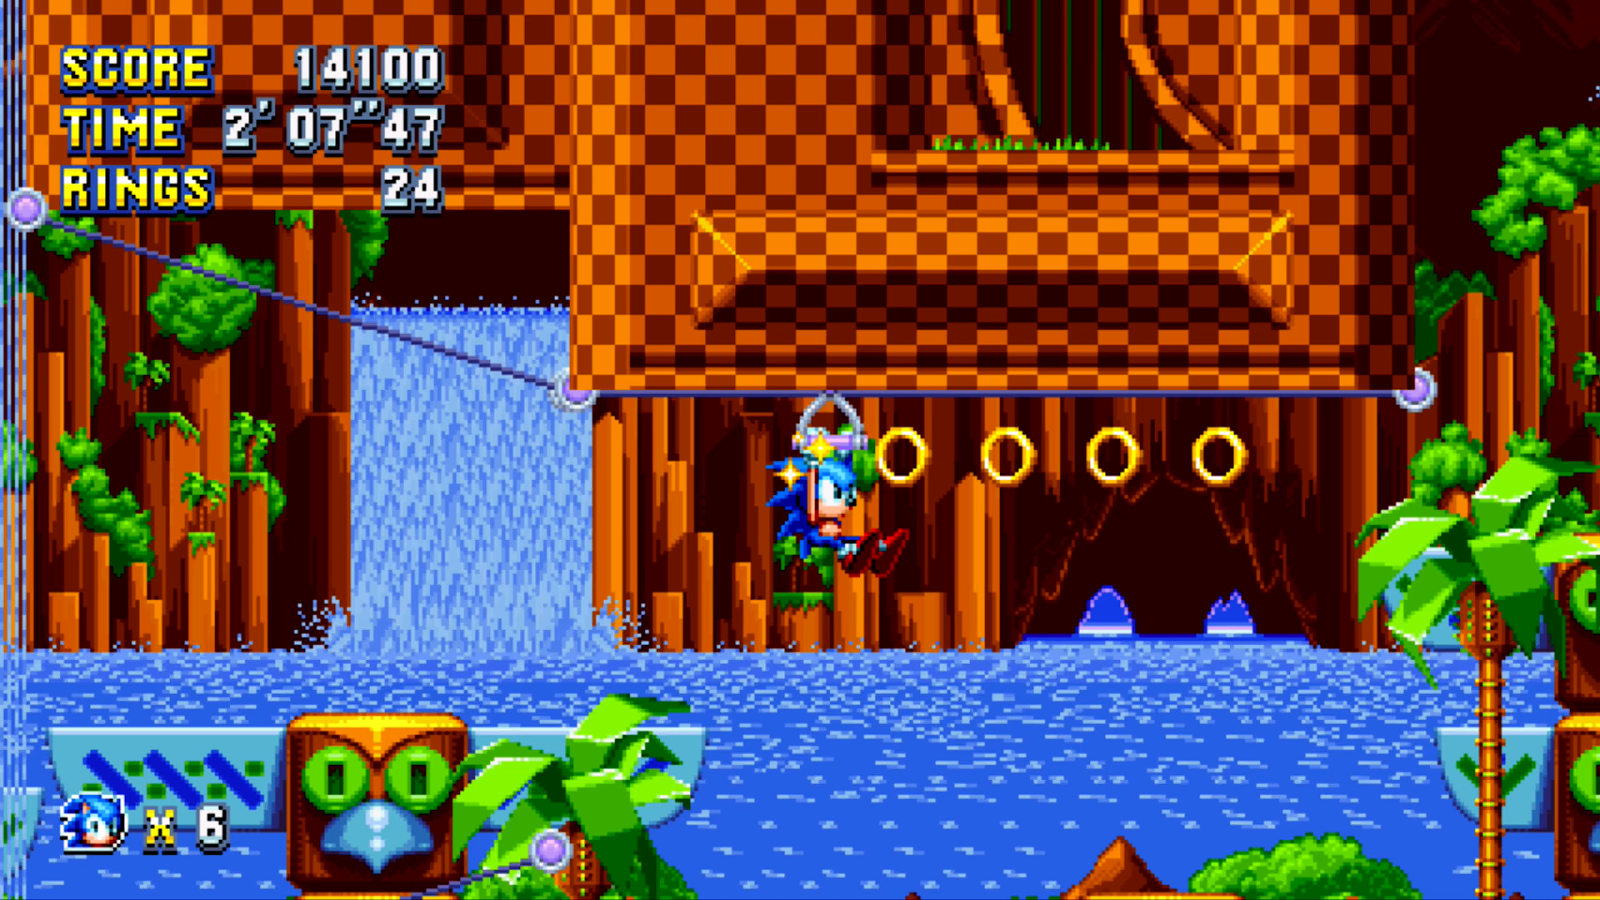 Sonic Mania New Video Shows Off Green Hill Zone Act 2